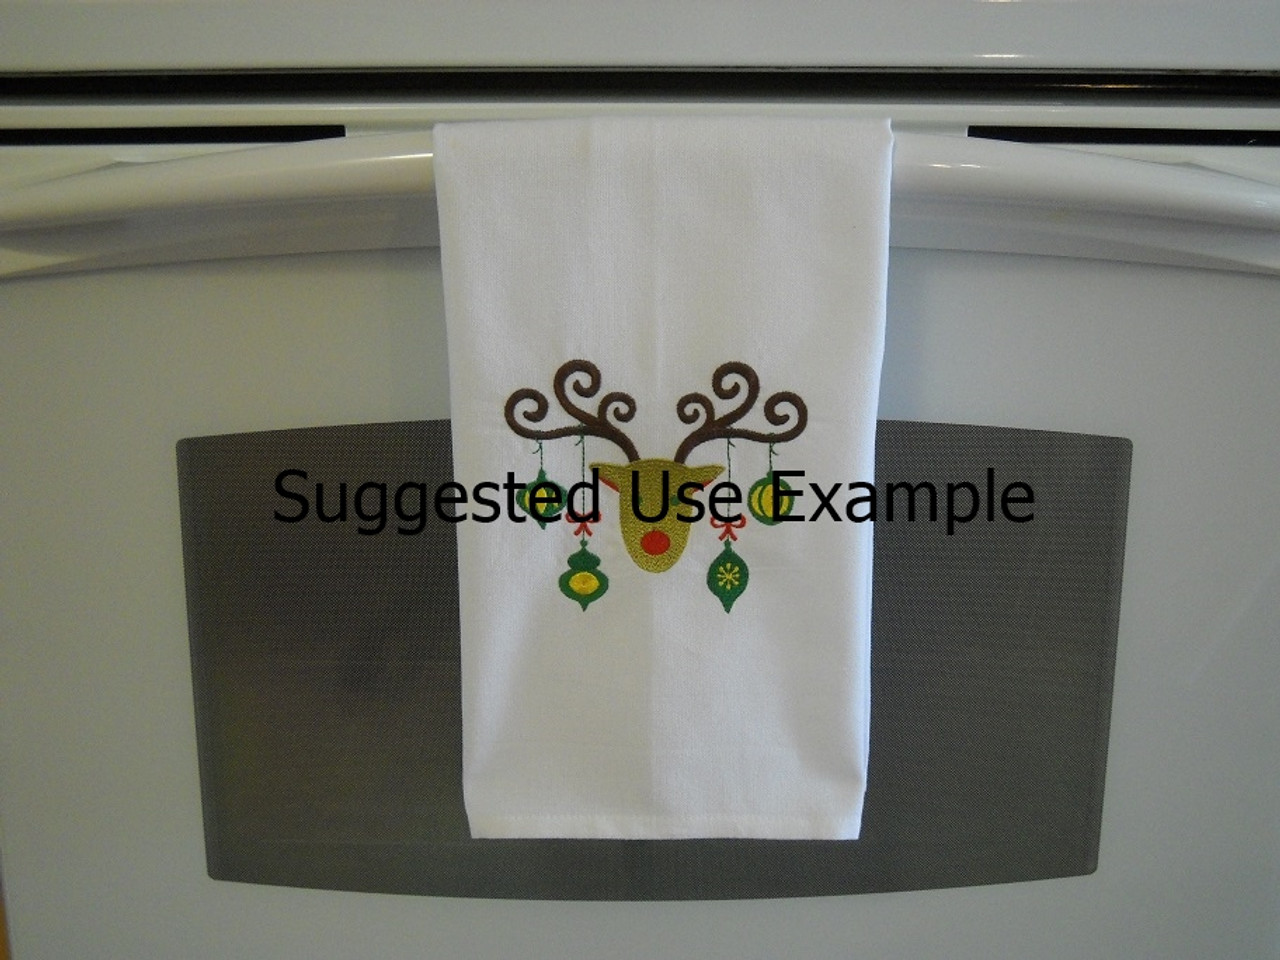 Mocha - Kitchen Towel - 20" x 28"
Embroidery on a wheat colored towel.
100% Cotton with loop, for optional hanging.
Machine washable in cool water and tumble dry at low temperature.
Minimal shrinkage.
Size: 20" x 28"